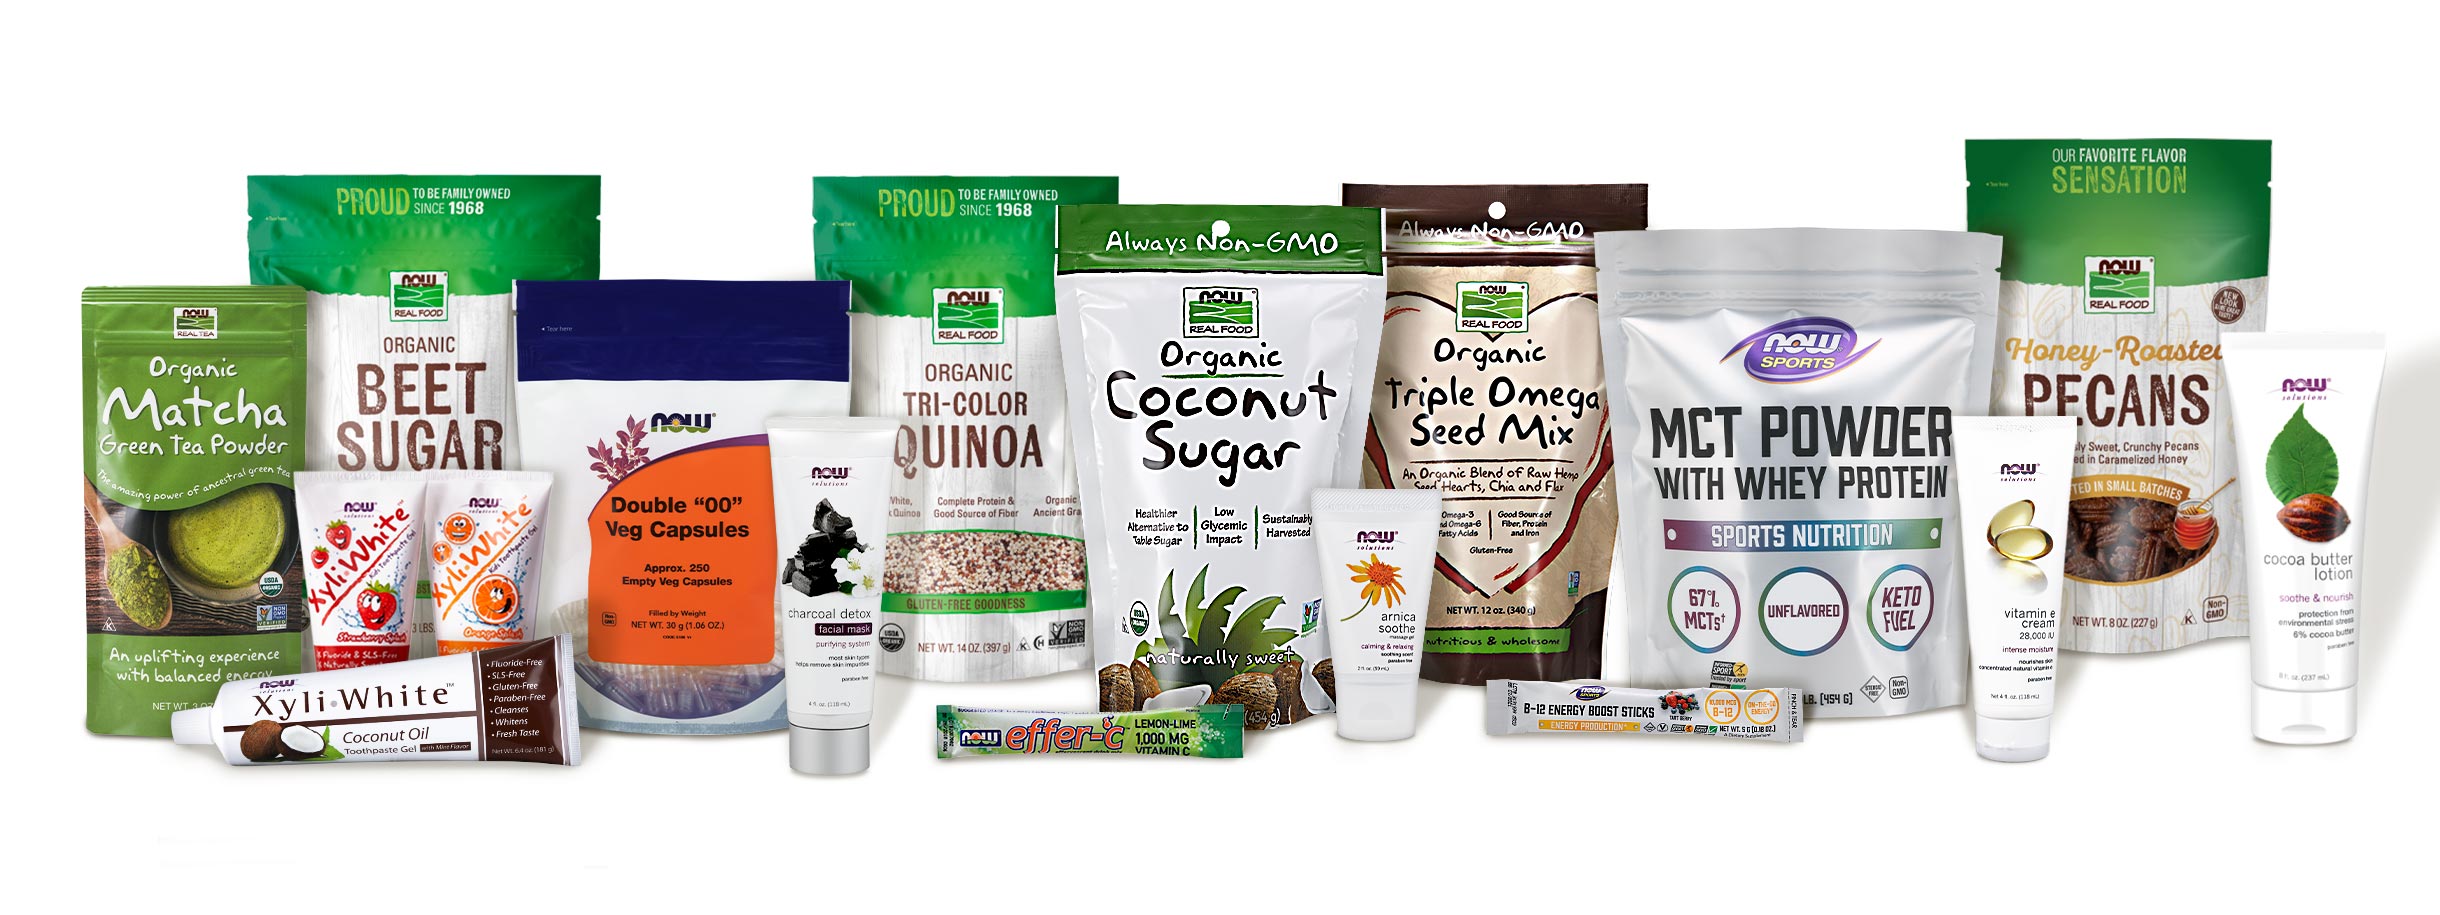 A variety of non-recyclable NOW products shown that include squeeze tubes of toothpastes and skin creams, as well as seed and nut pouches, protein powder and drink stick pouches that are all recyclable through the terracycle program.